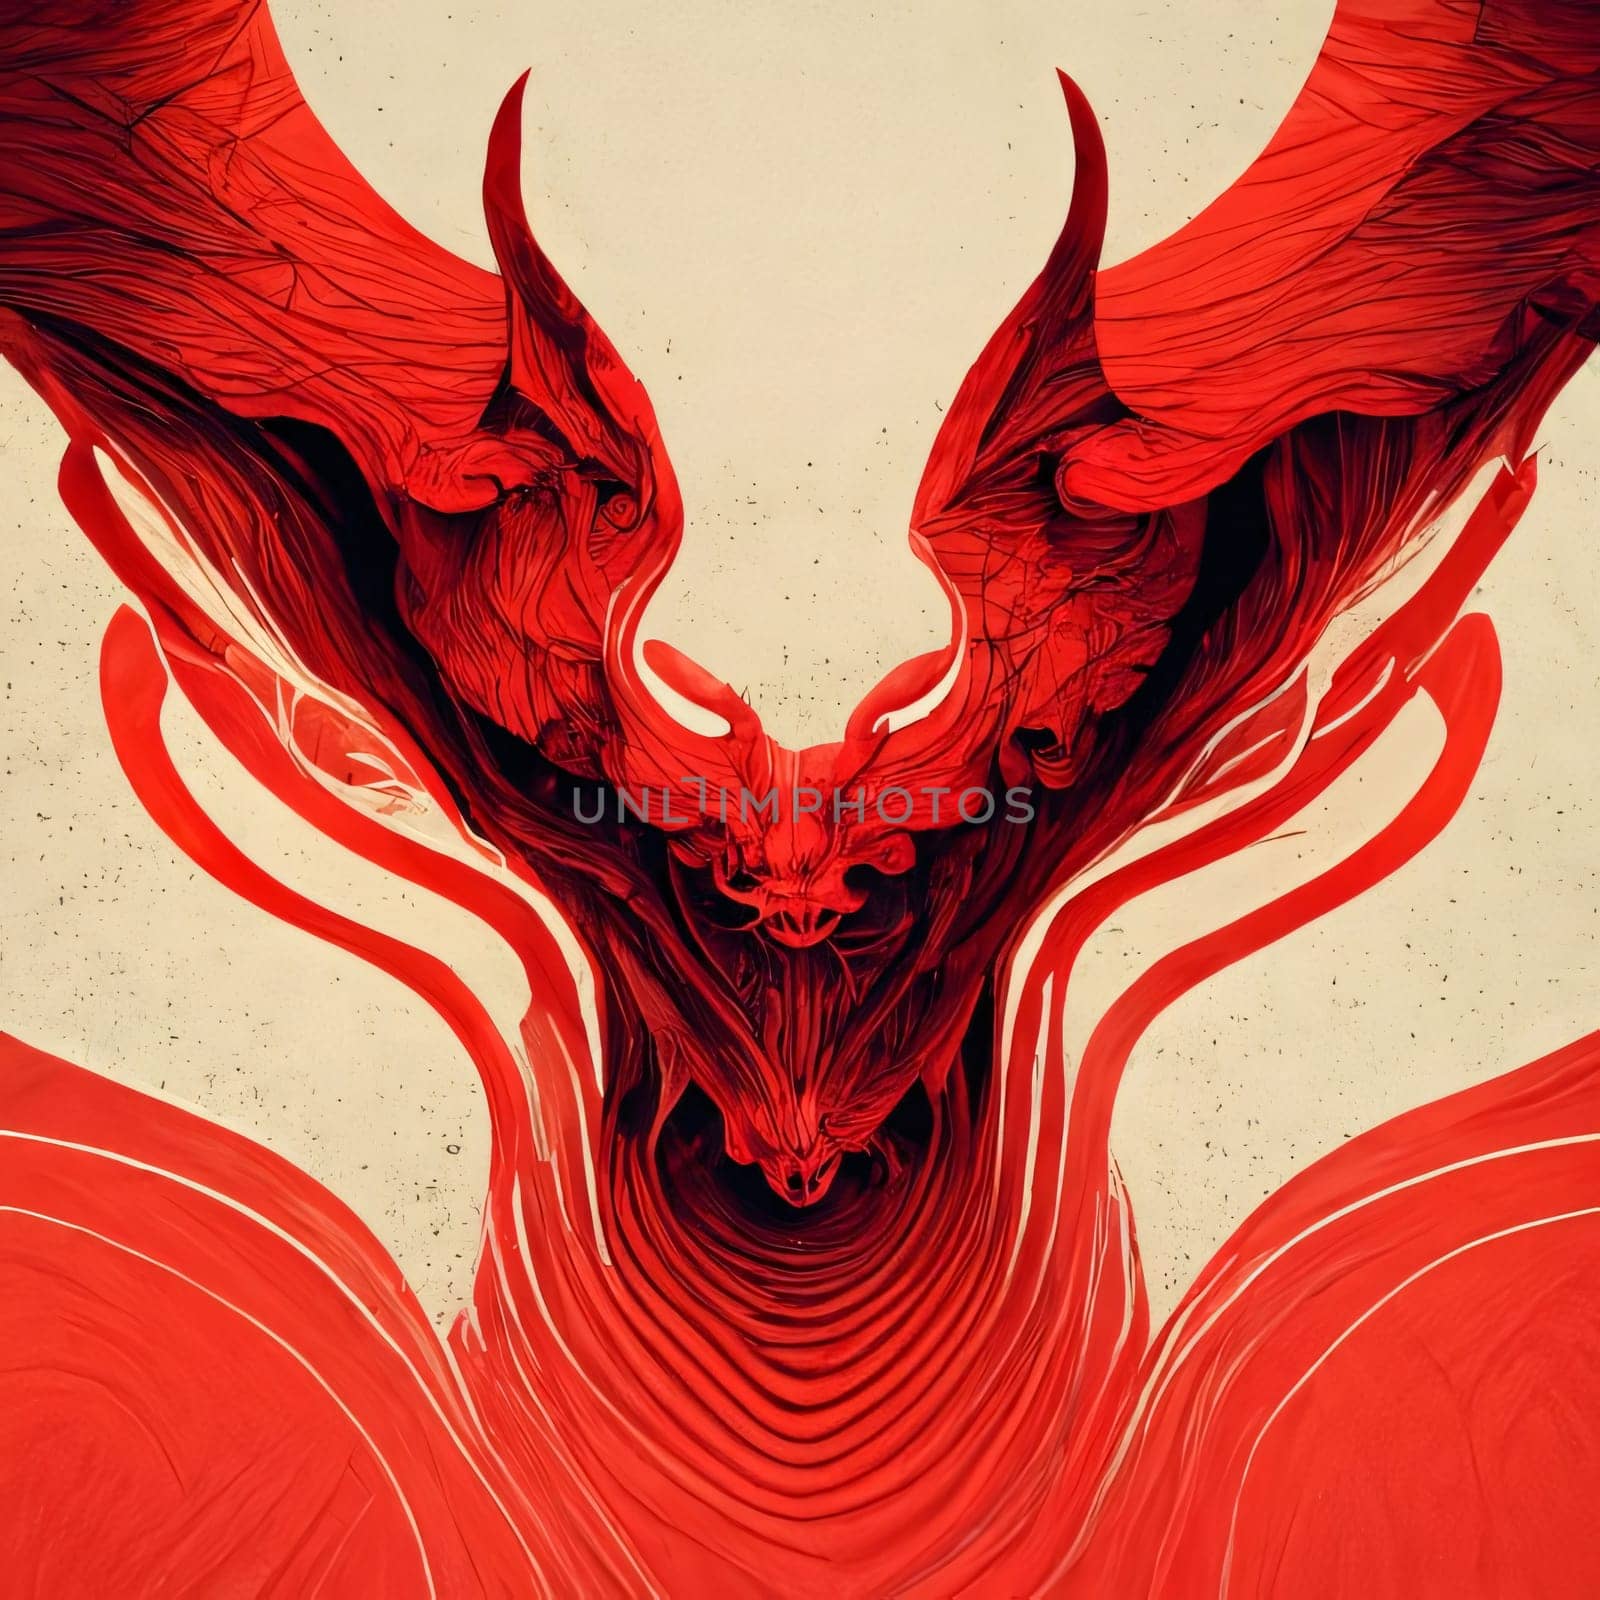 Abstract background design: Red dragon on grunge background. 3D rendering. Computer digital drawing.